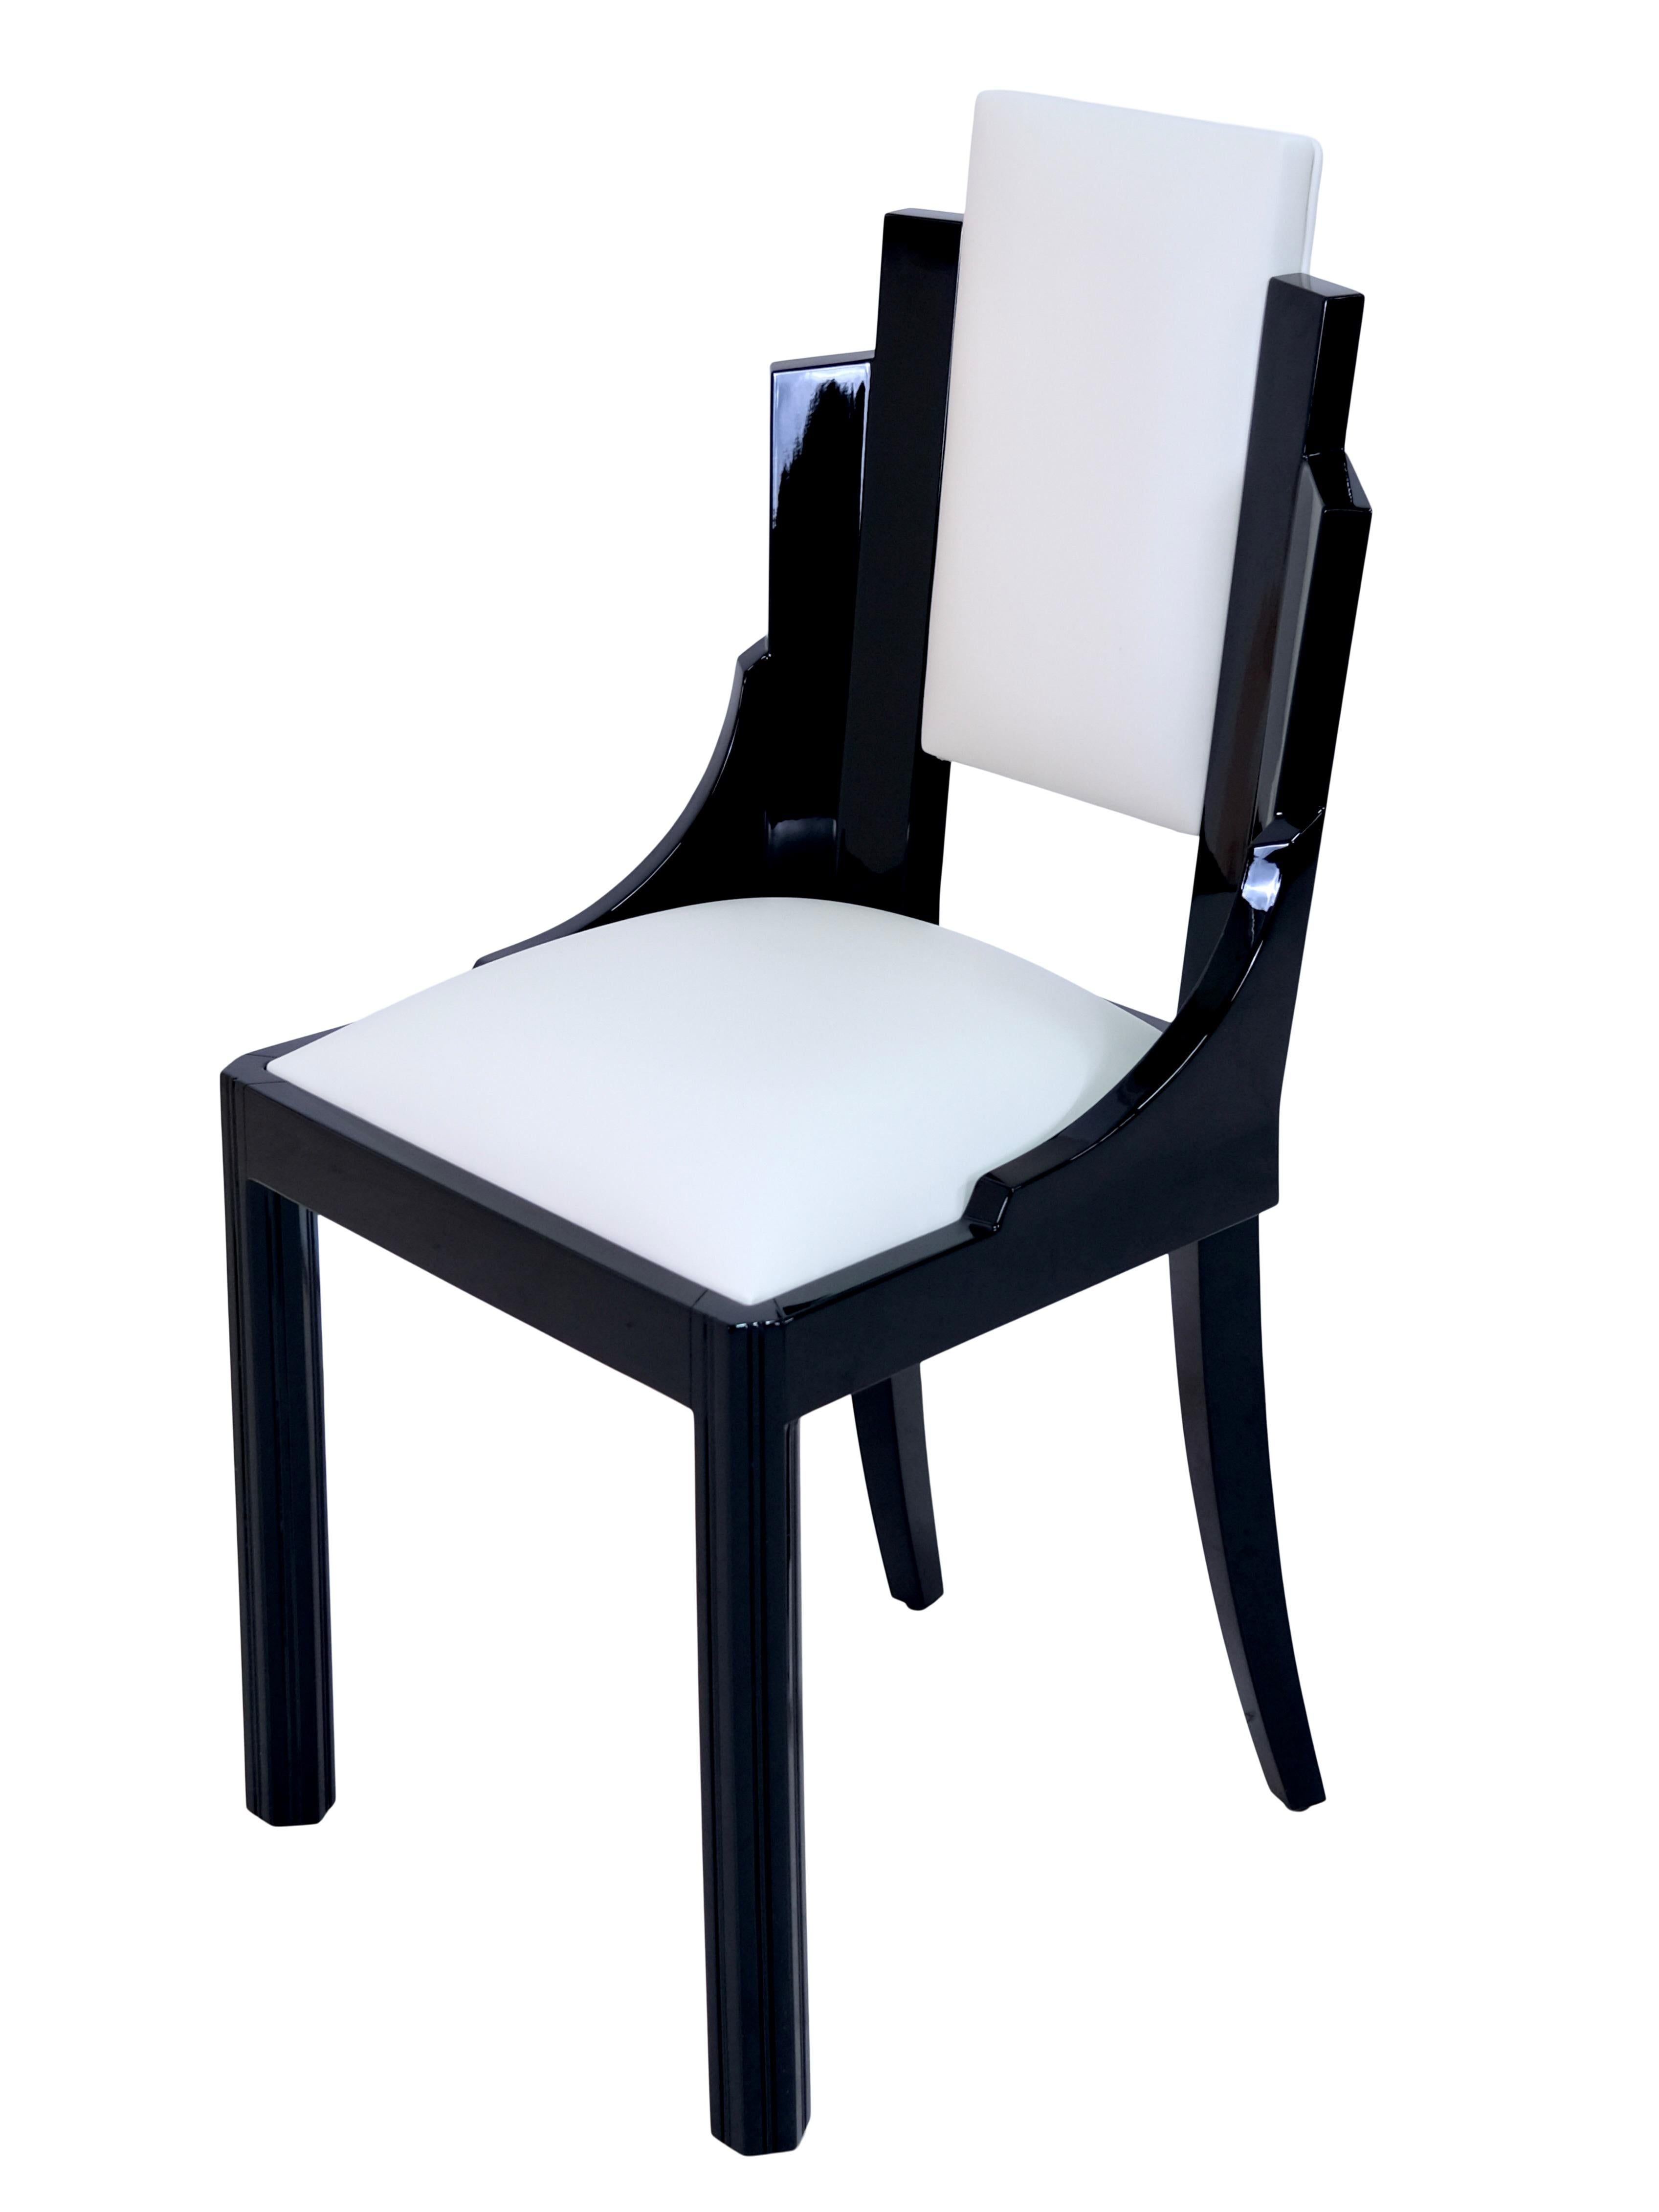 The upholstered backrest of the chairs is held by fan-shaped graduated elements.
Piano lacquer in high-gloss black
White leather, freshly upholstered.

Set consisting of 6 pieces

Original Art Deco, France 1930s

Dimensions:
Width: 47